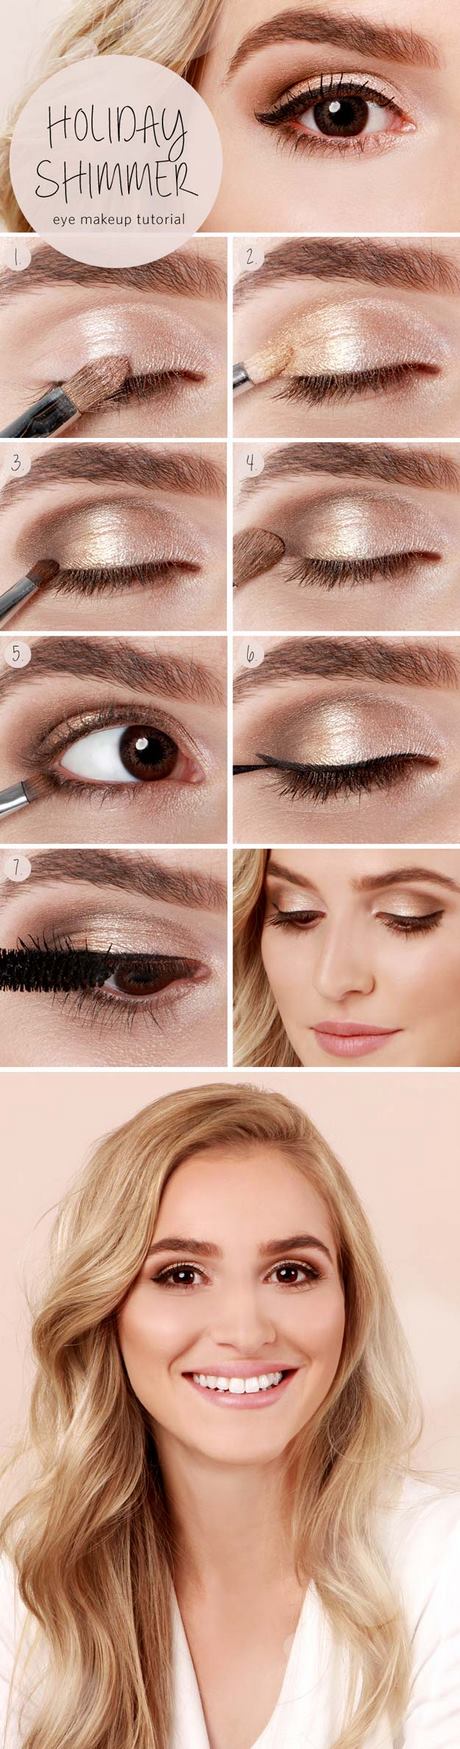 makeup-tutorial-with-pictures-15_11 Make-up les met foto  s